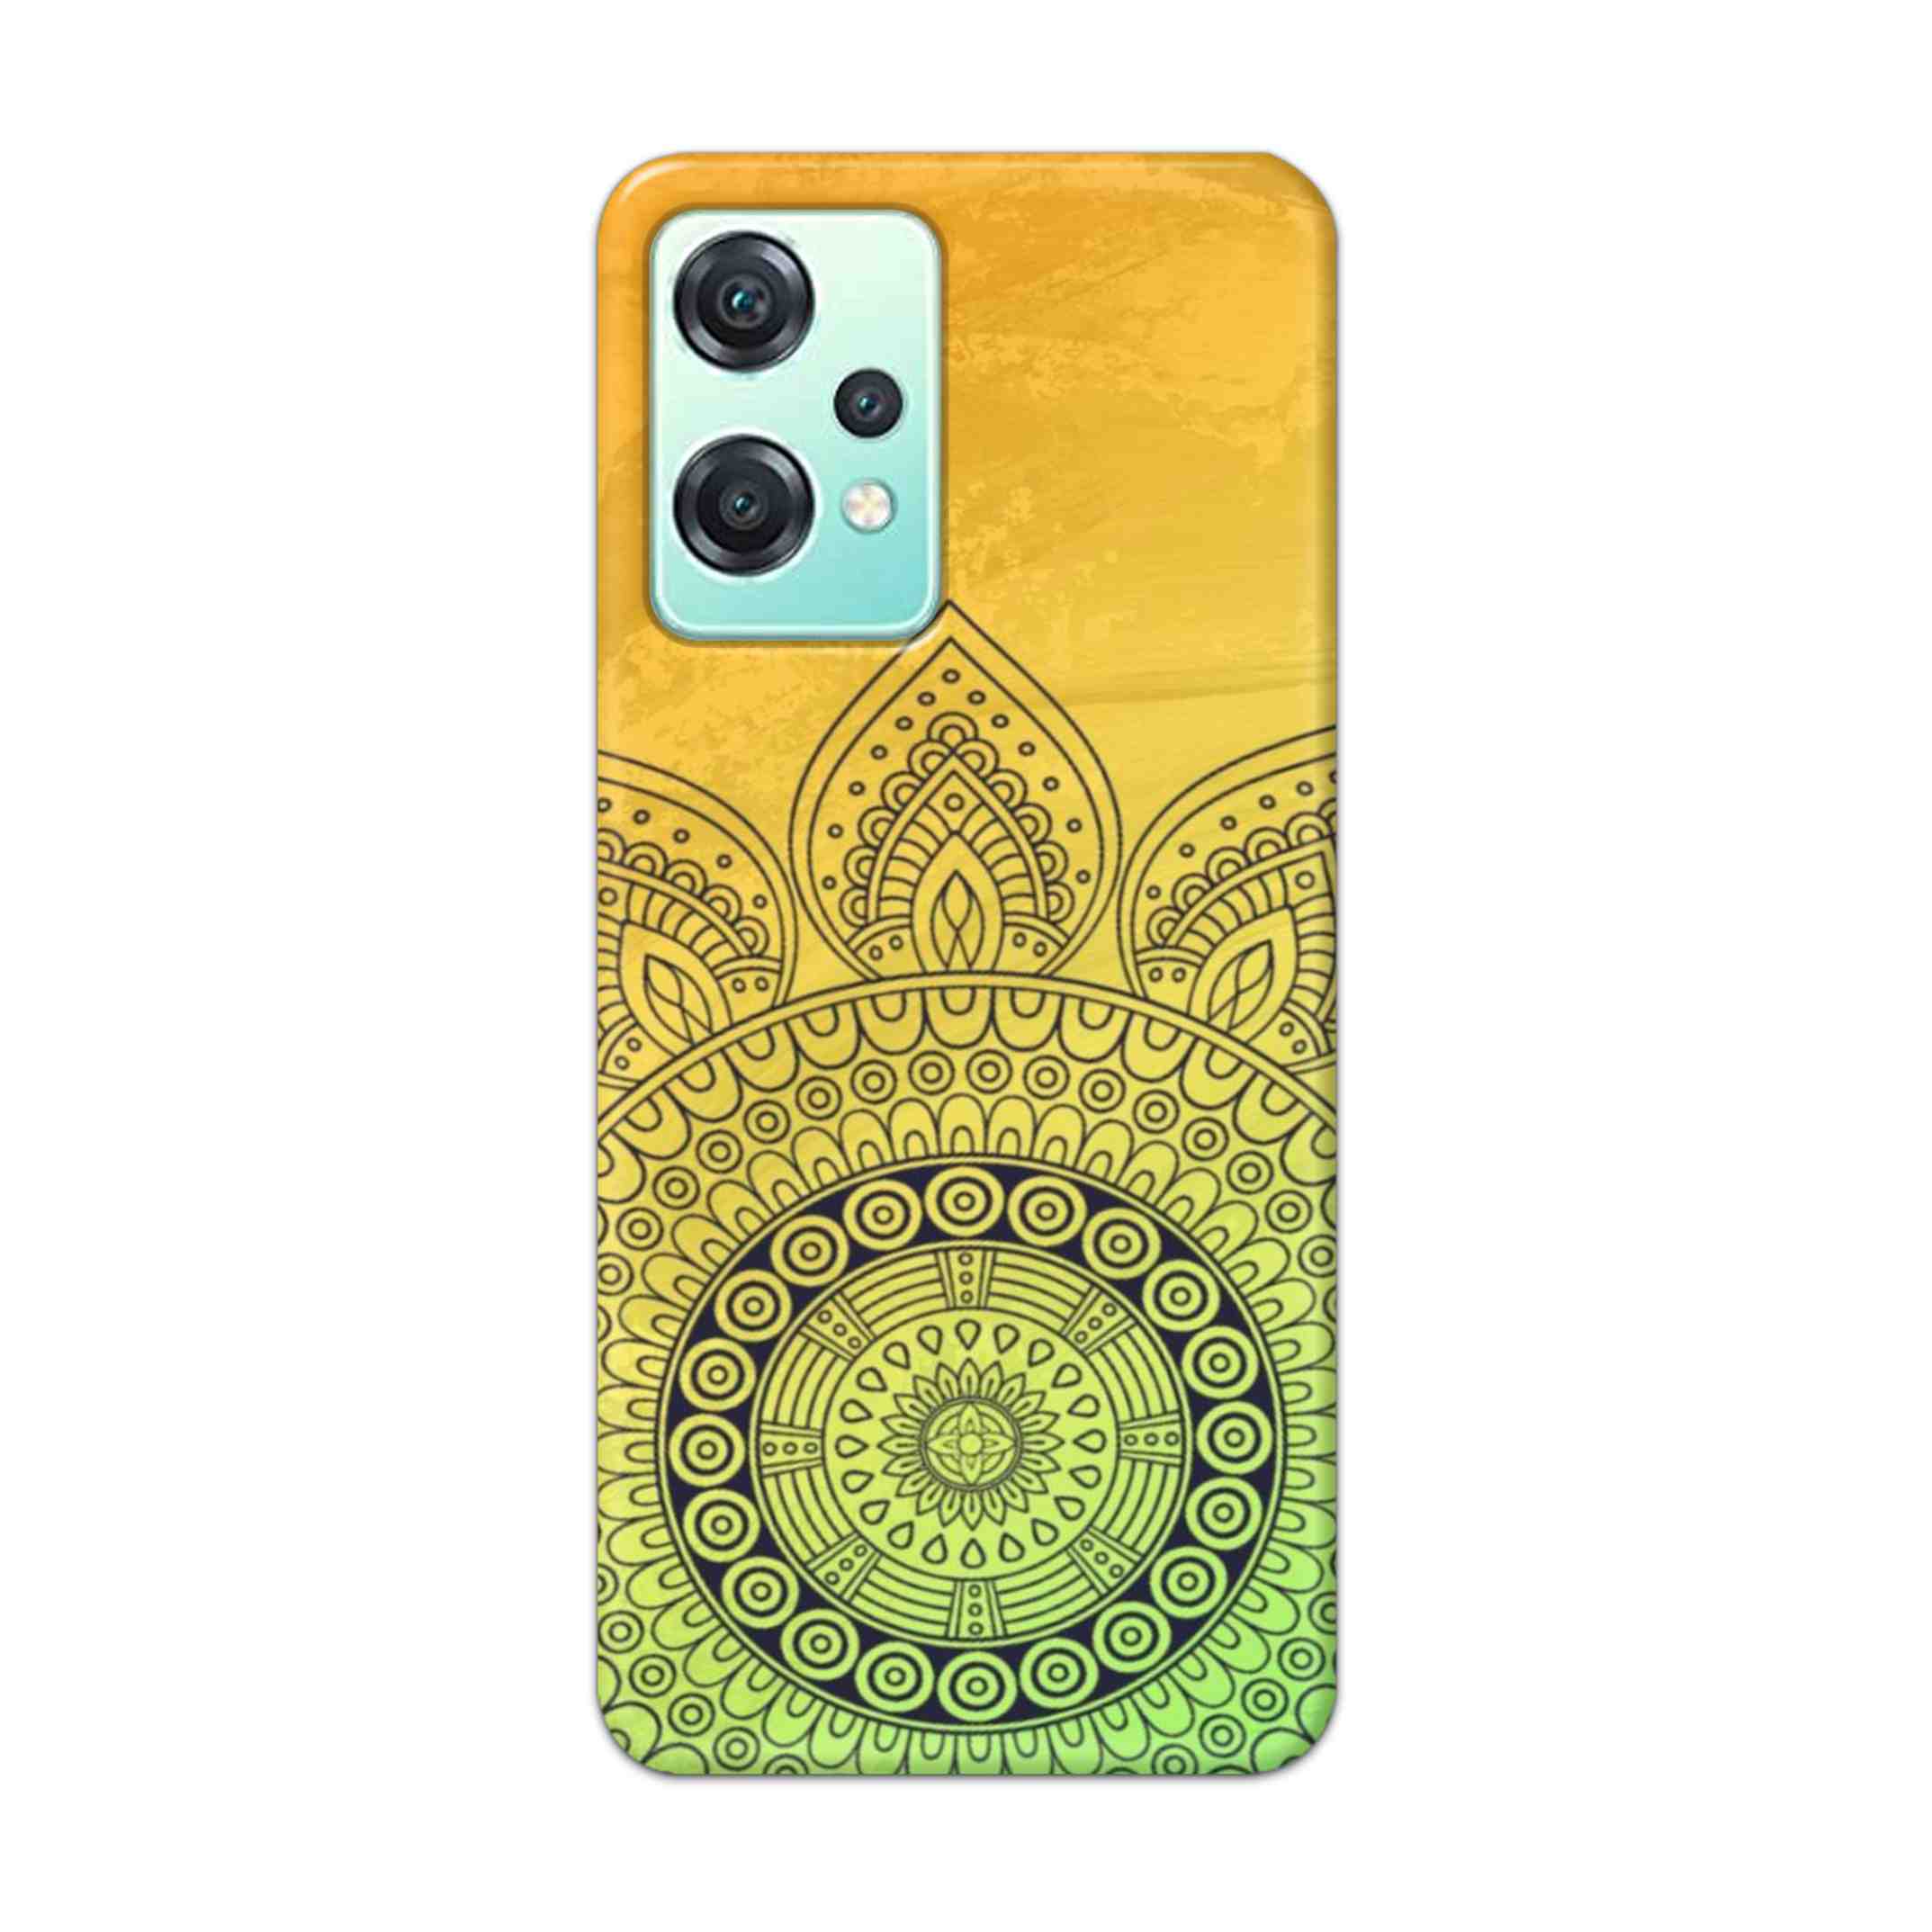 Buy Yellow Rangoli Hard Back Mobile Phone Case Cover For OnePlus Nord CE 2 Lite 5G Online